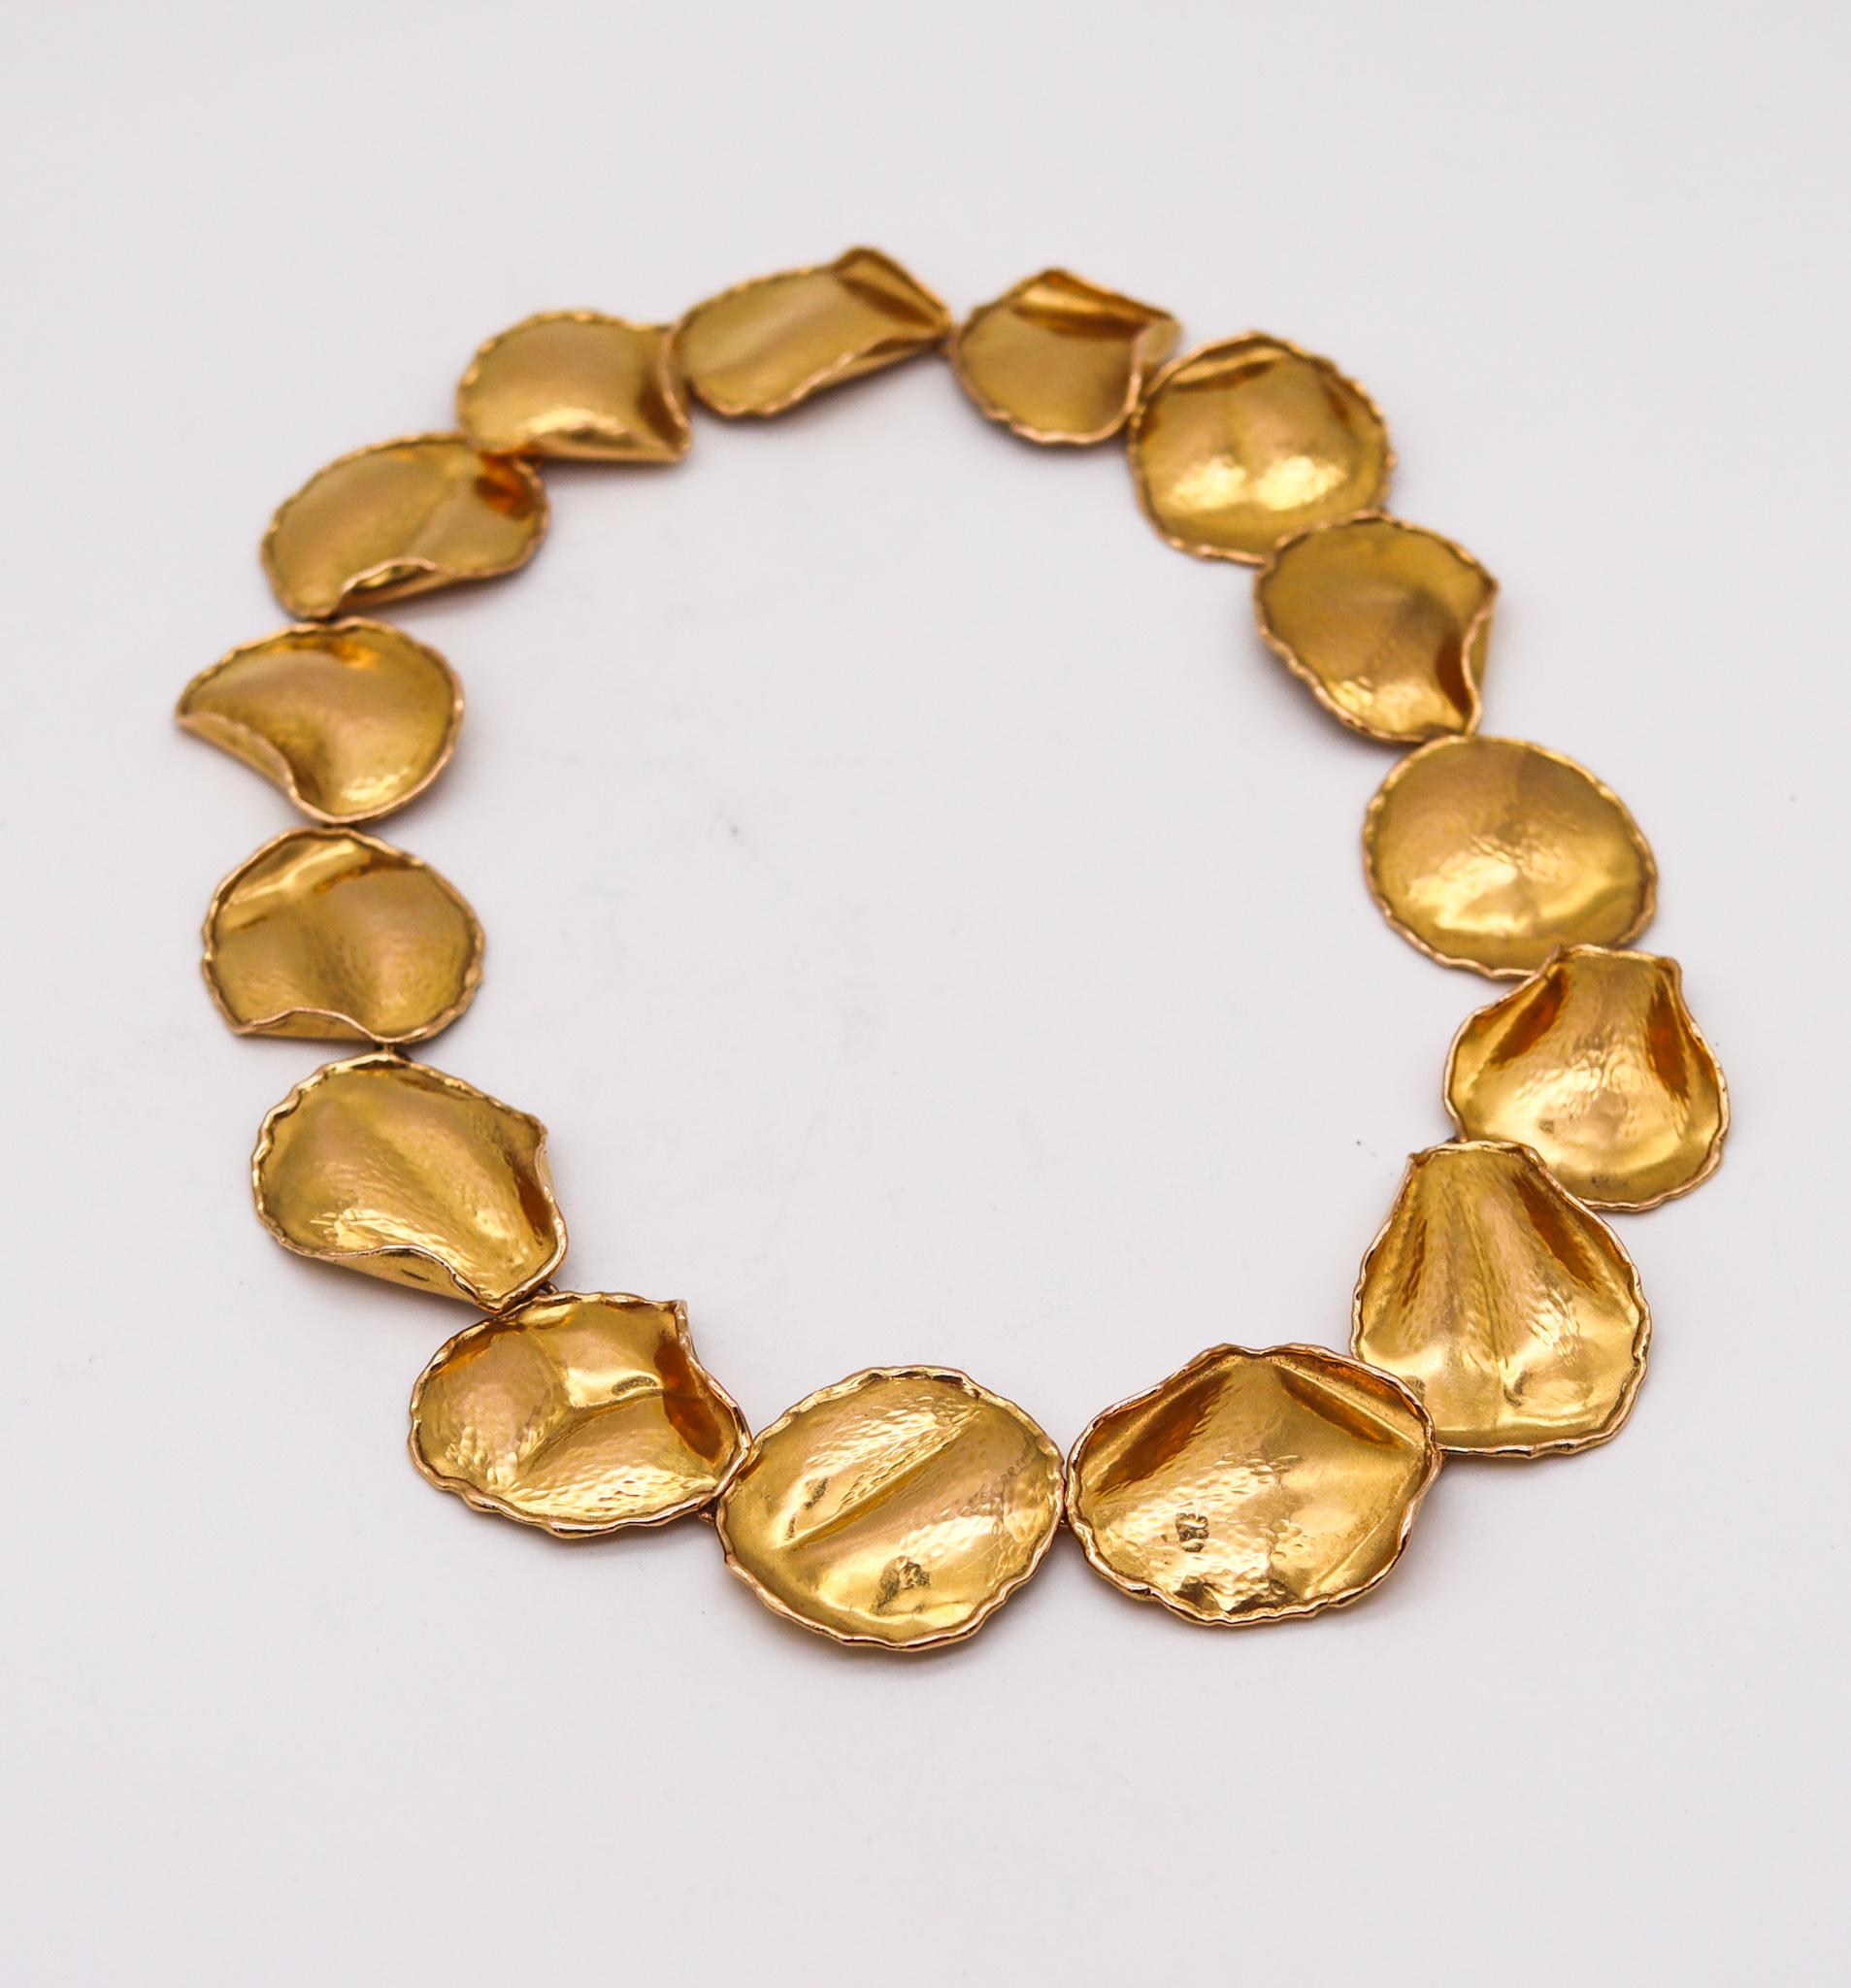 Necklace of petals designed by Angela Cummings.

Beautiful necklace, created by Angela Cummings for the Tiffany Studios in New York city, back in the 1979. This iconic and unique necklace was carefully crafted in solid yellow gold of 18 karats with